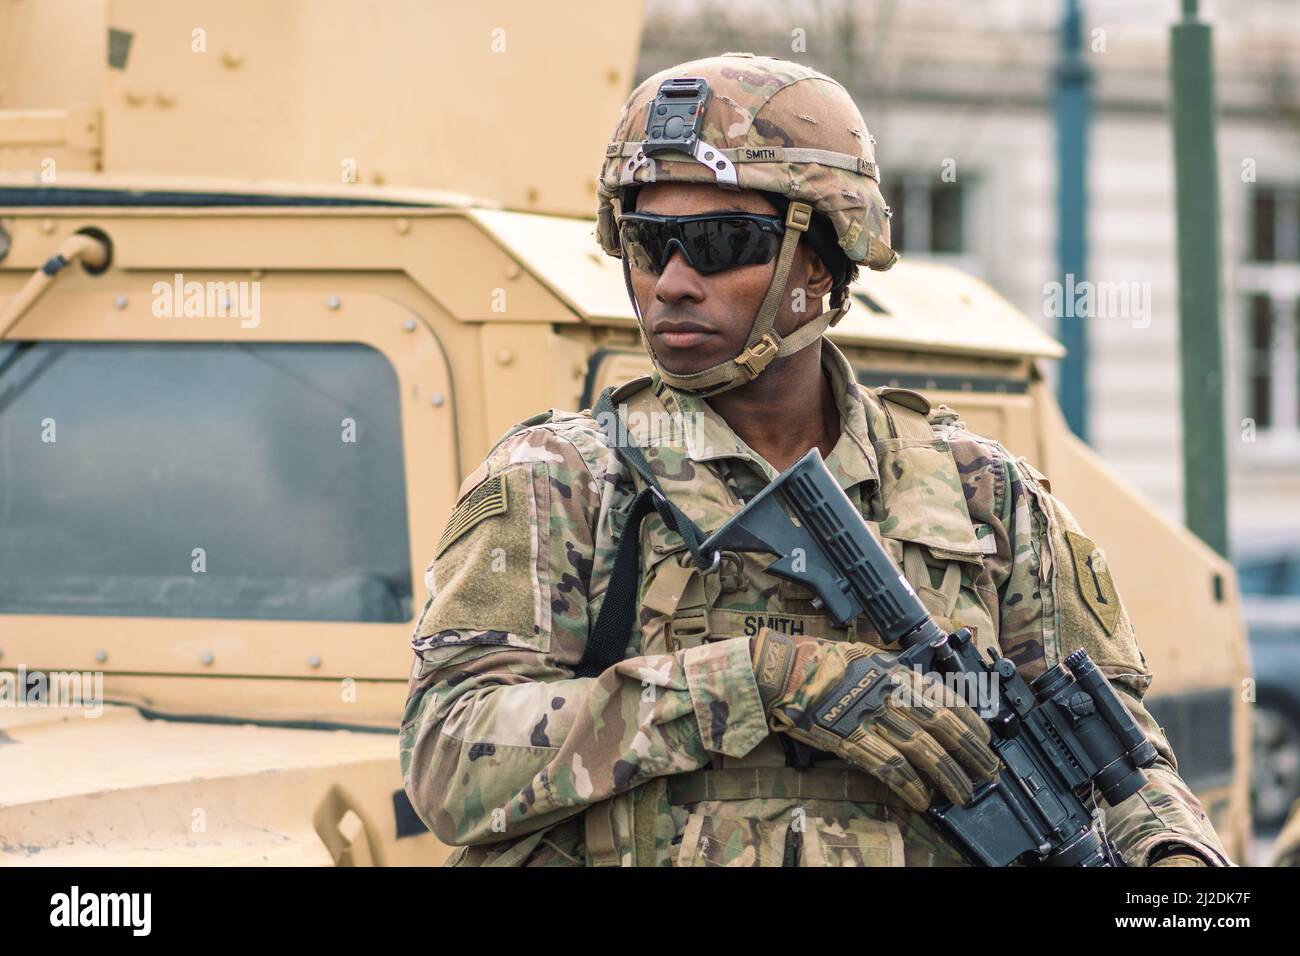 African American United States Marine Corps soldier with sunglasses, shotgun or rifle and armored vehicle humvee, USA or US army troops ready for war Stock Photo